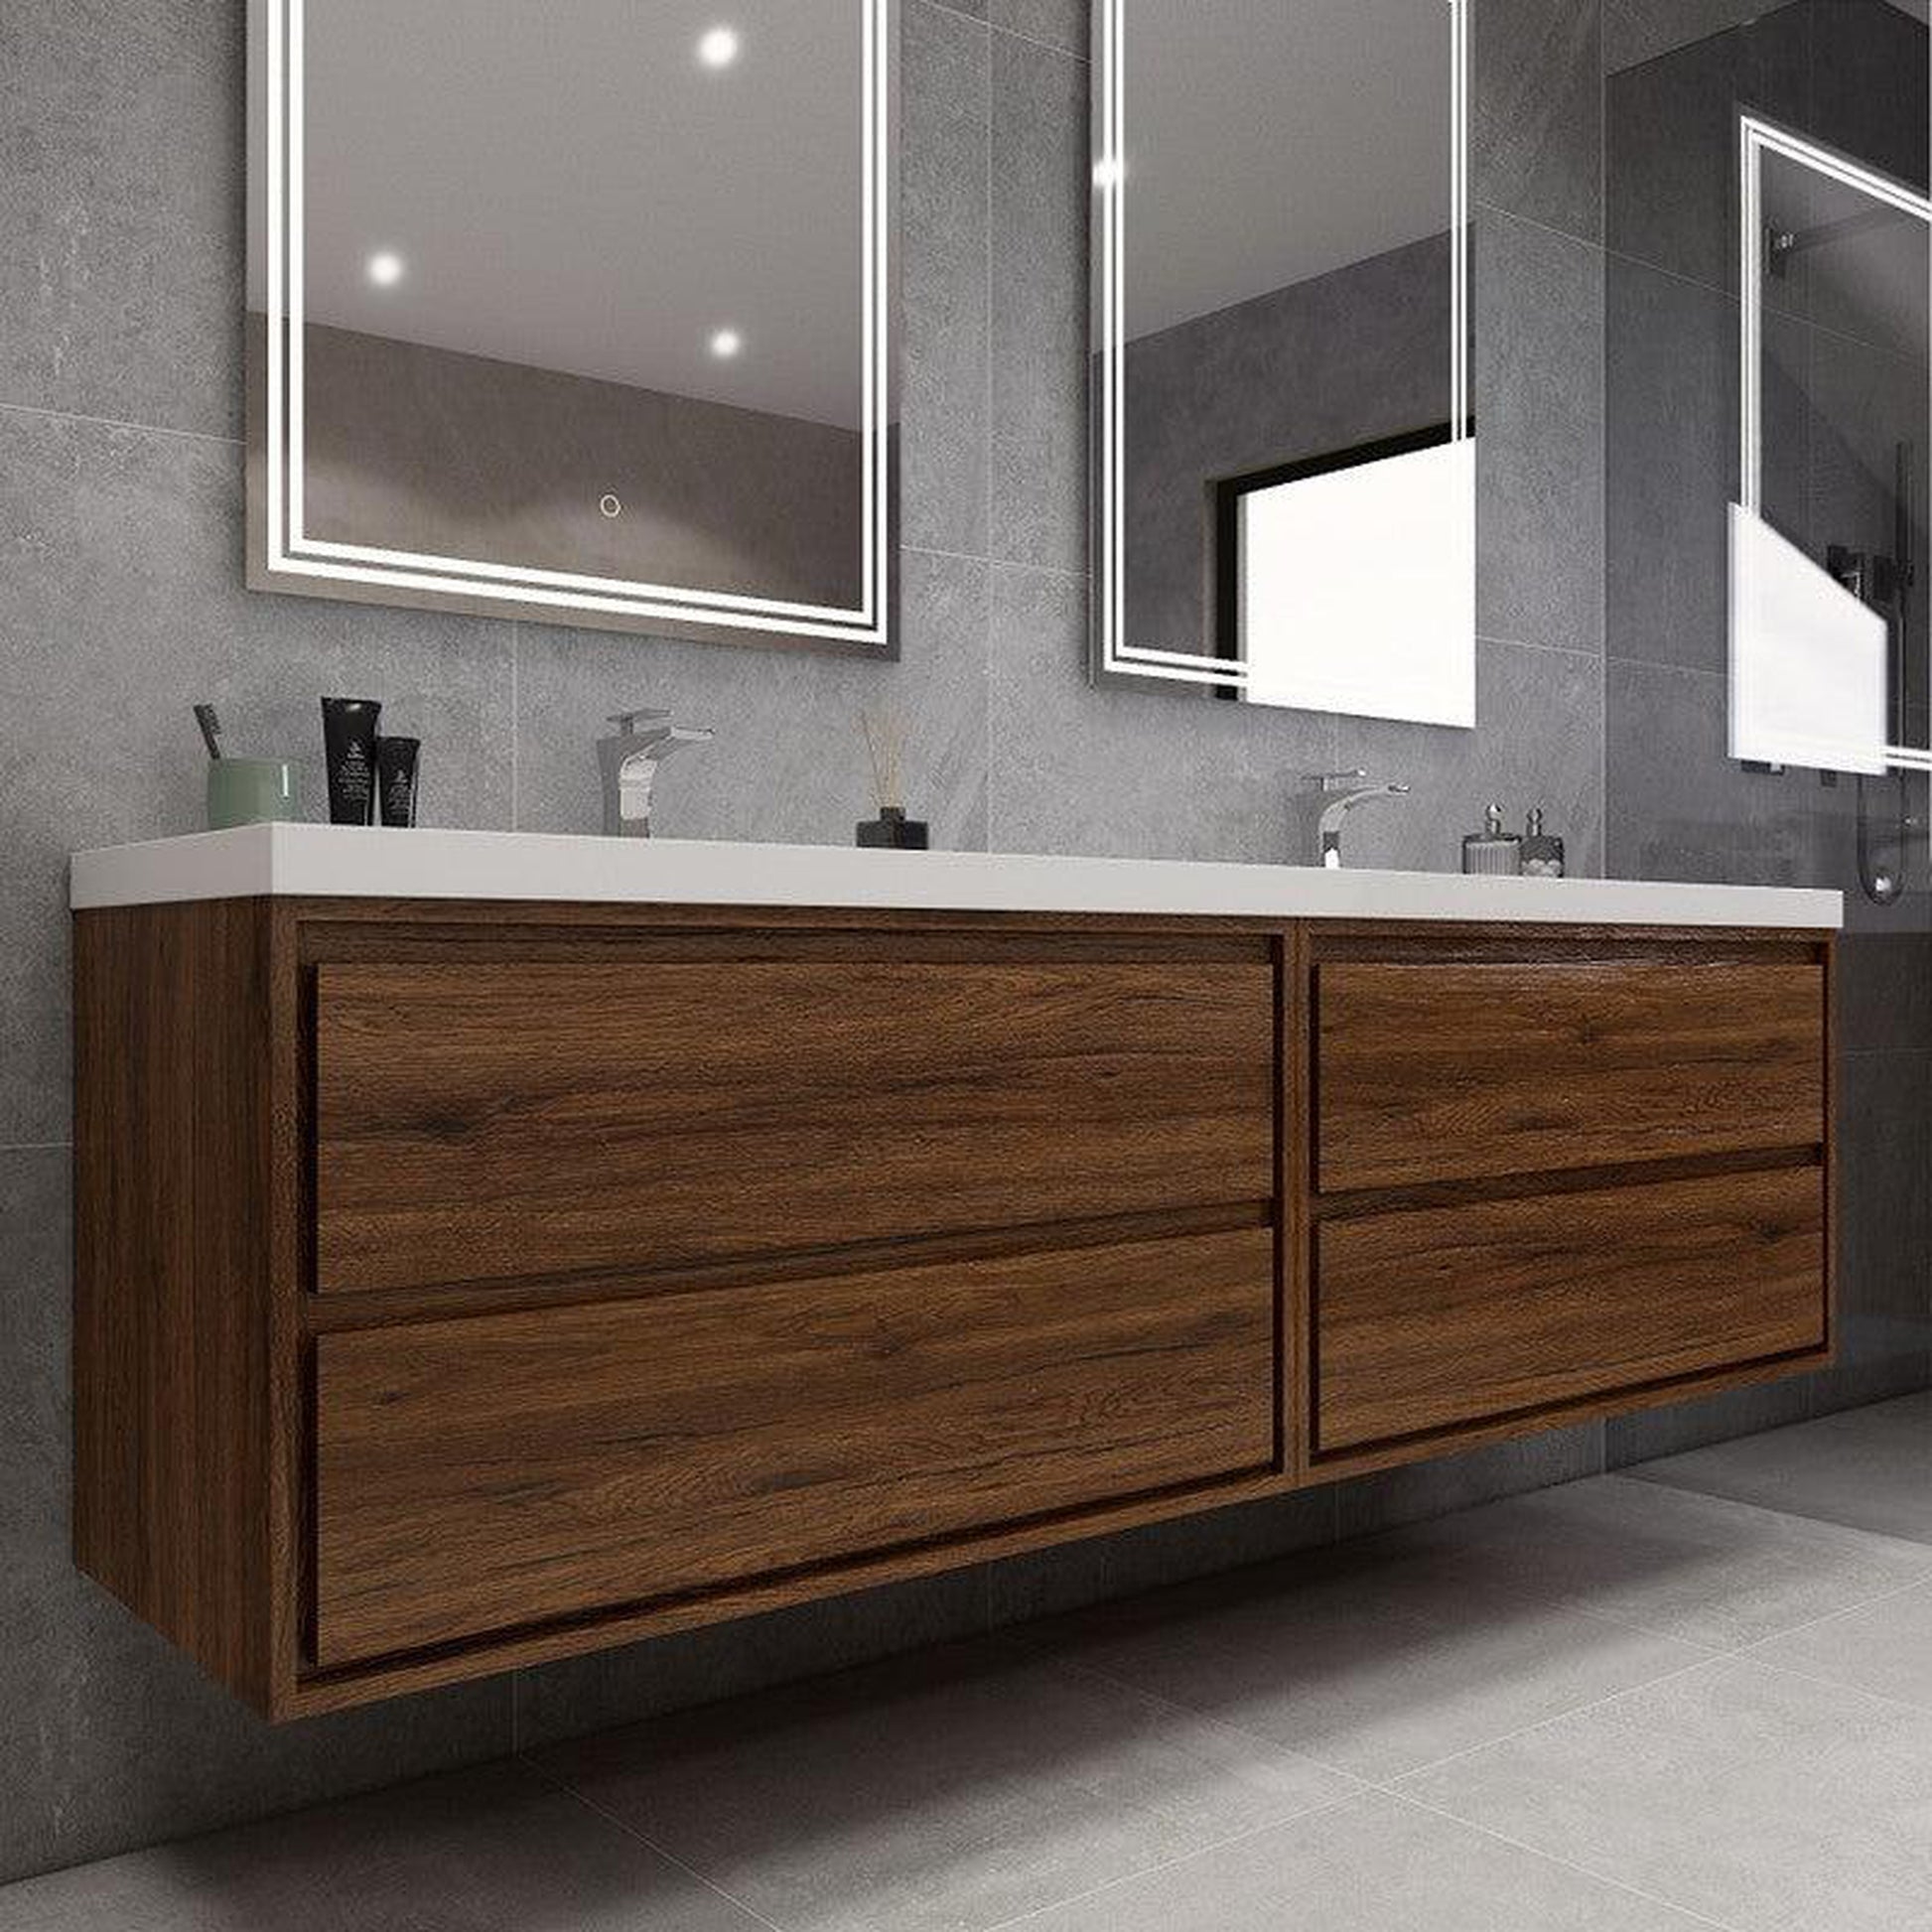 Moreno Bath Sage 84" Rosewood Wall-Mounted Modern Vanity With Double Reinforced White Acrylic Sinks